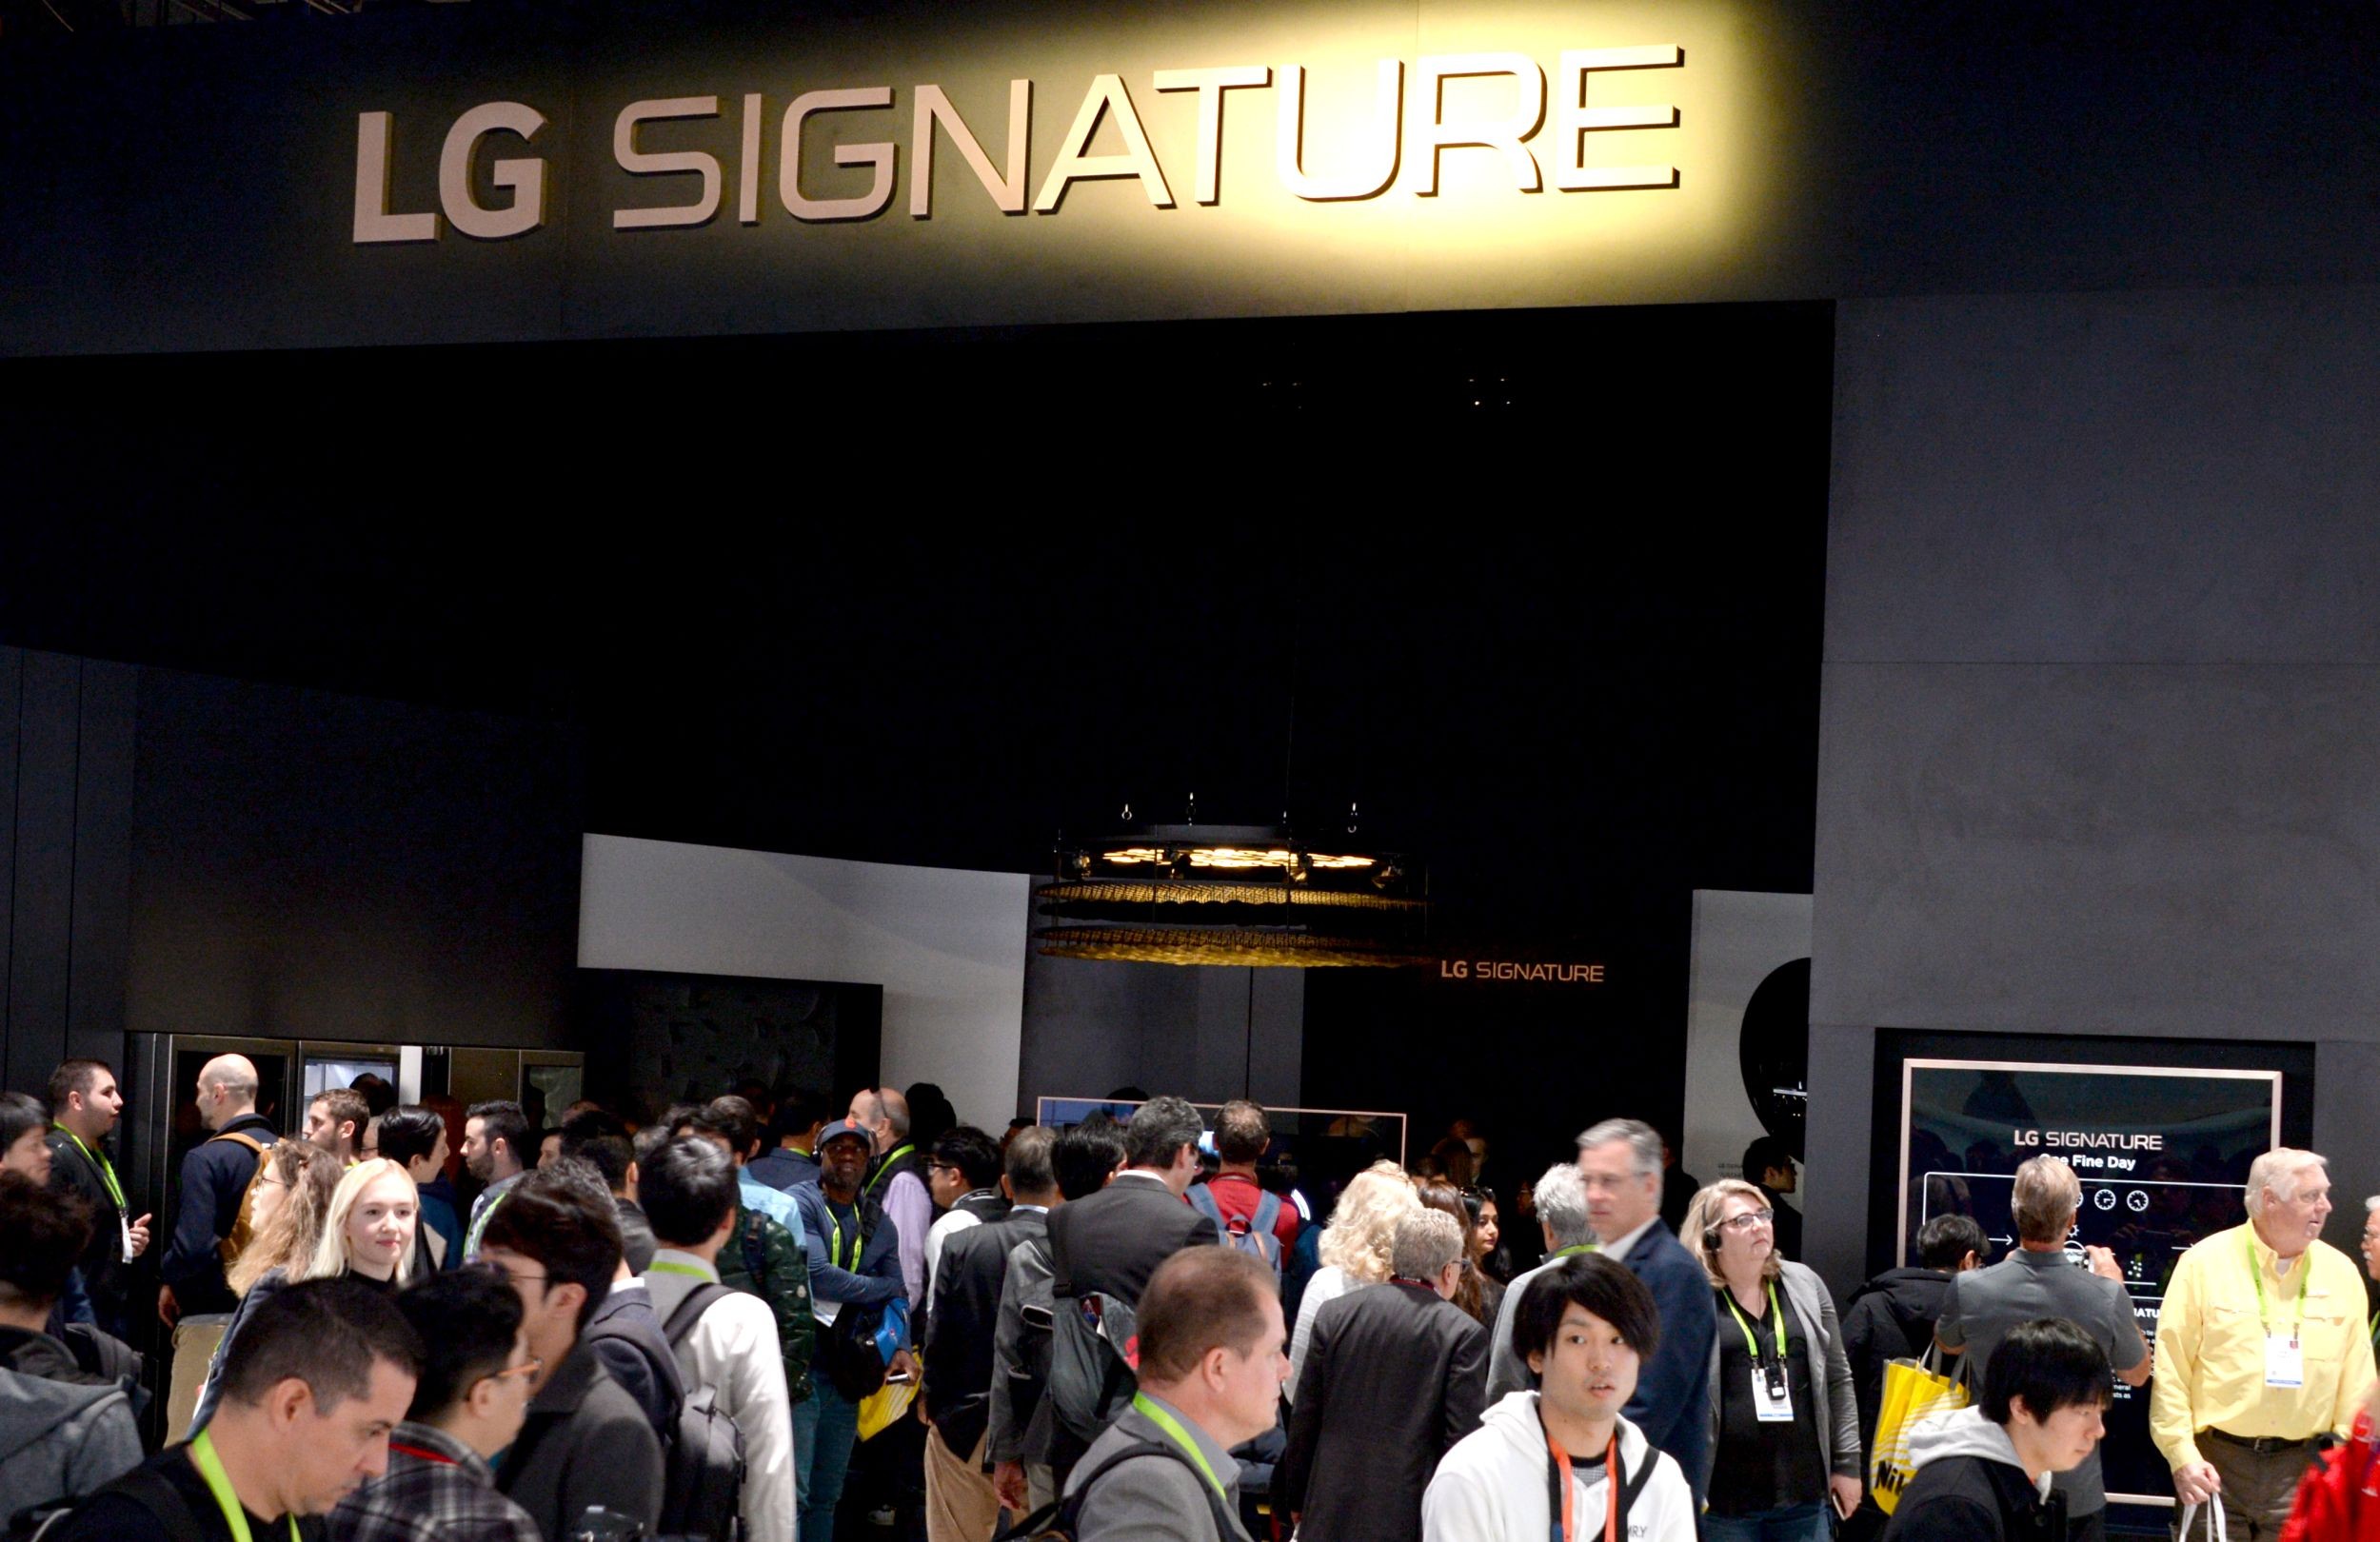 Conference attendees walk around the LG SIGNATURE display zone at CES 2019.